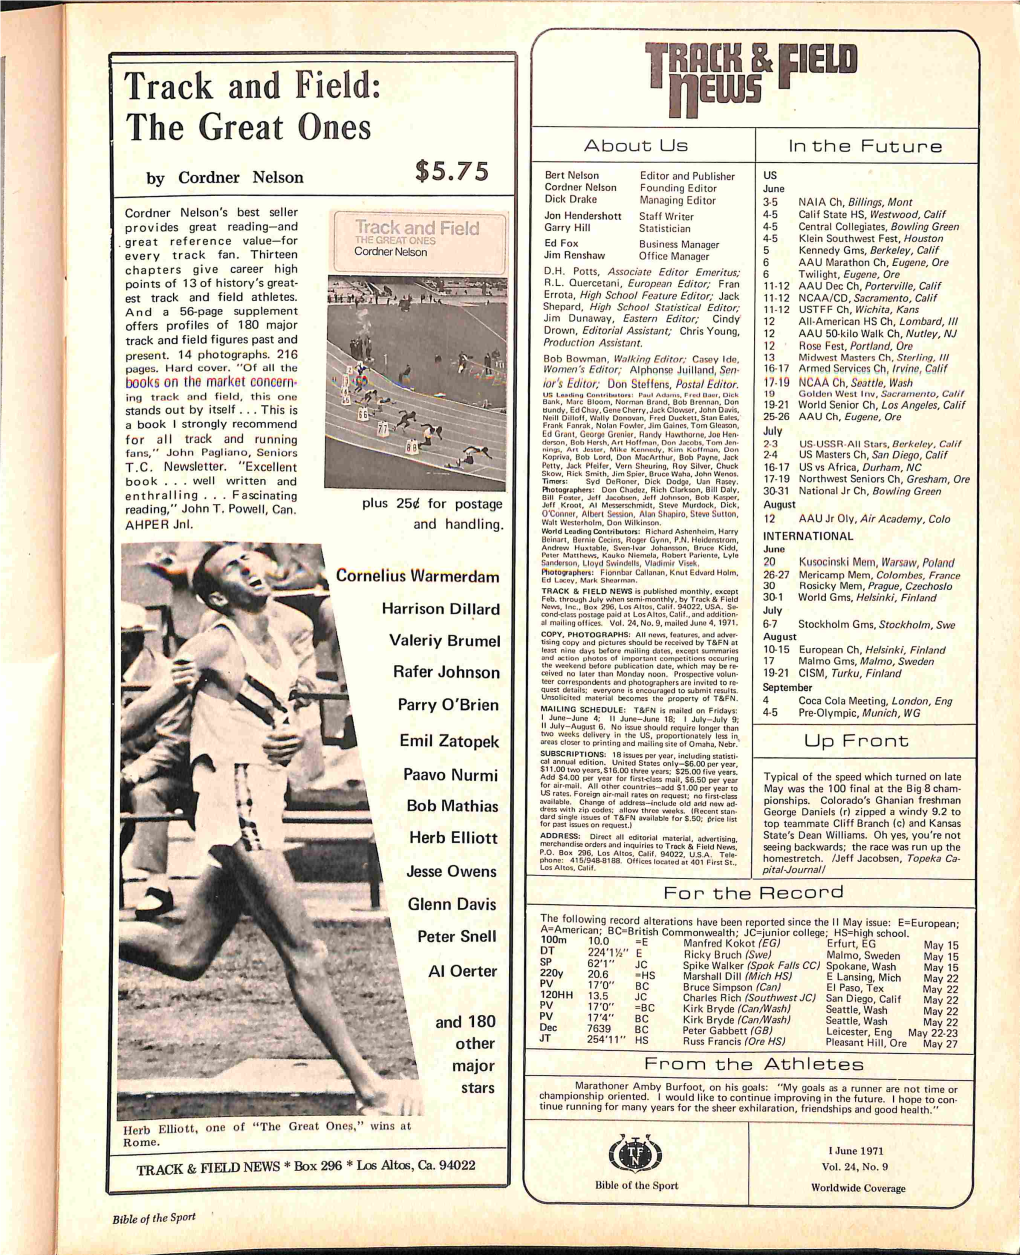 Track & Field News June 1971 Table of Contents